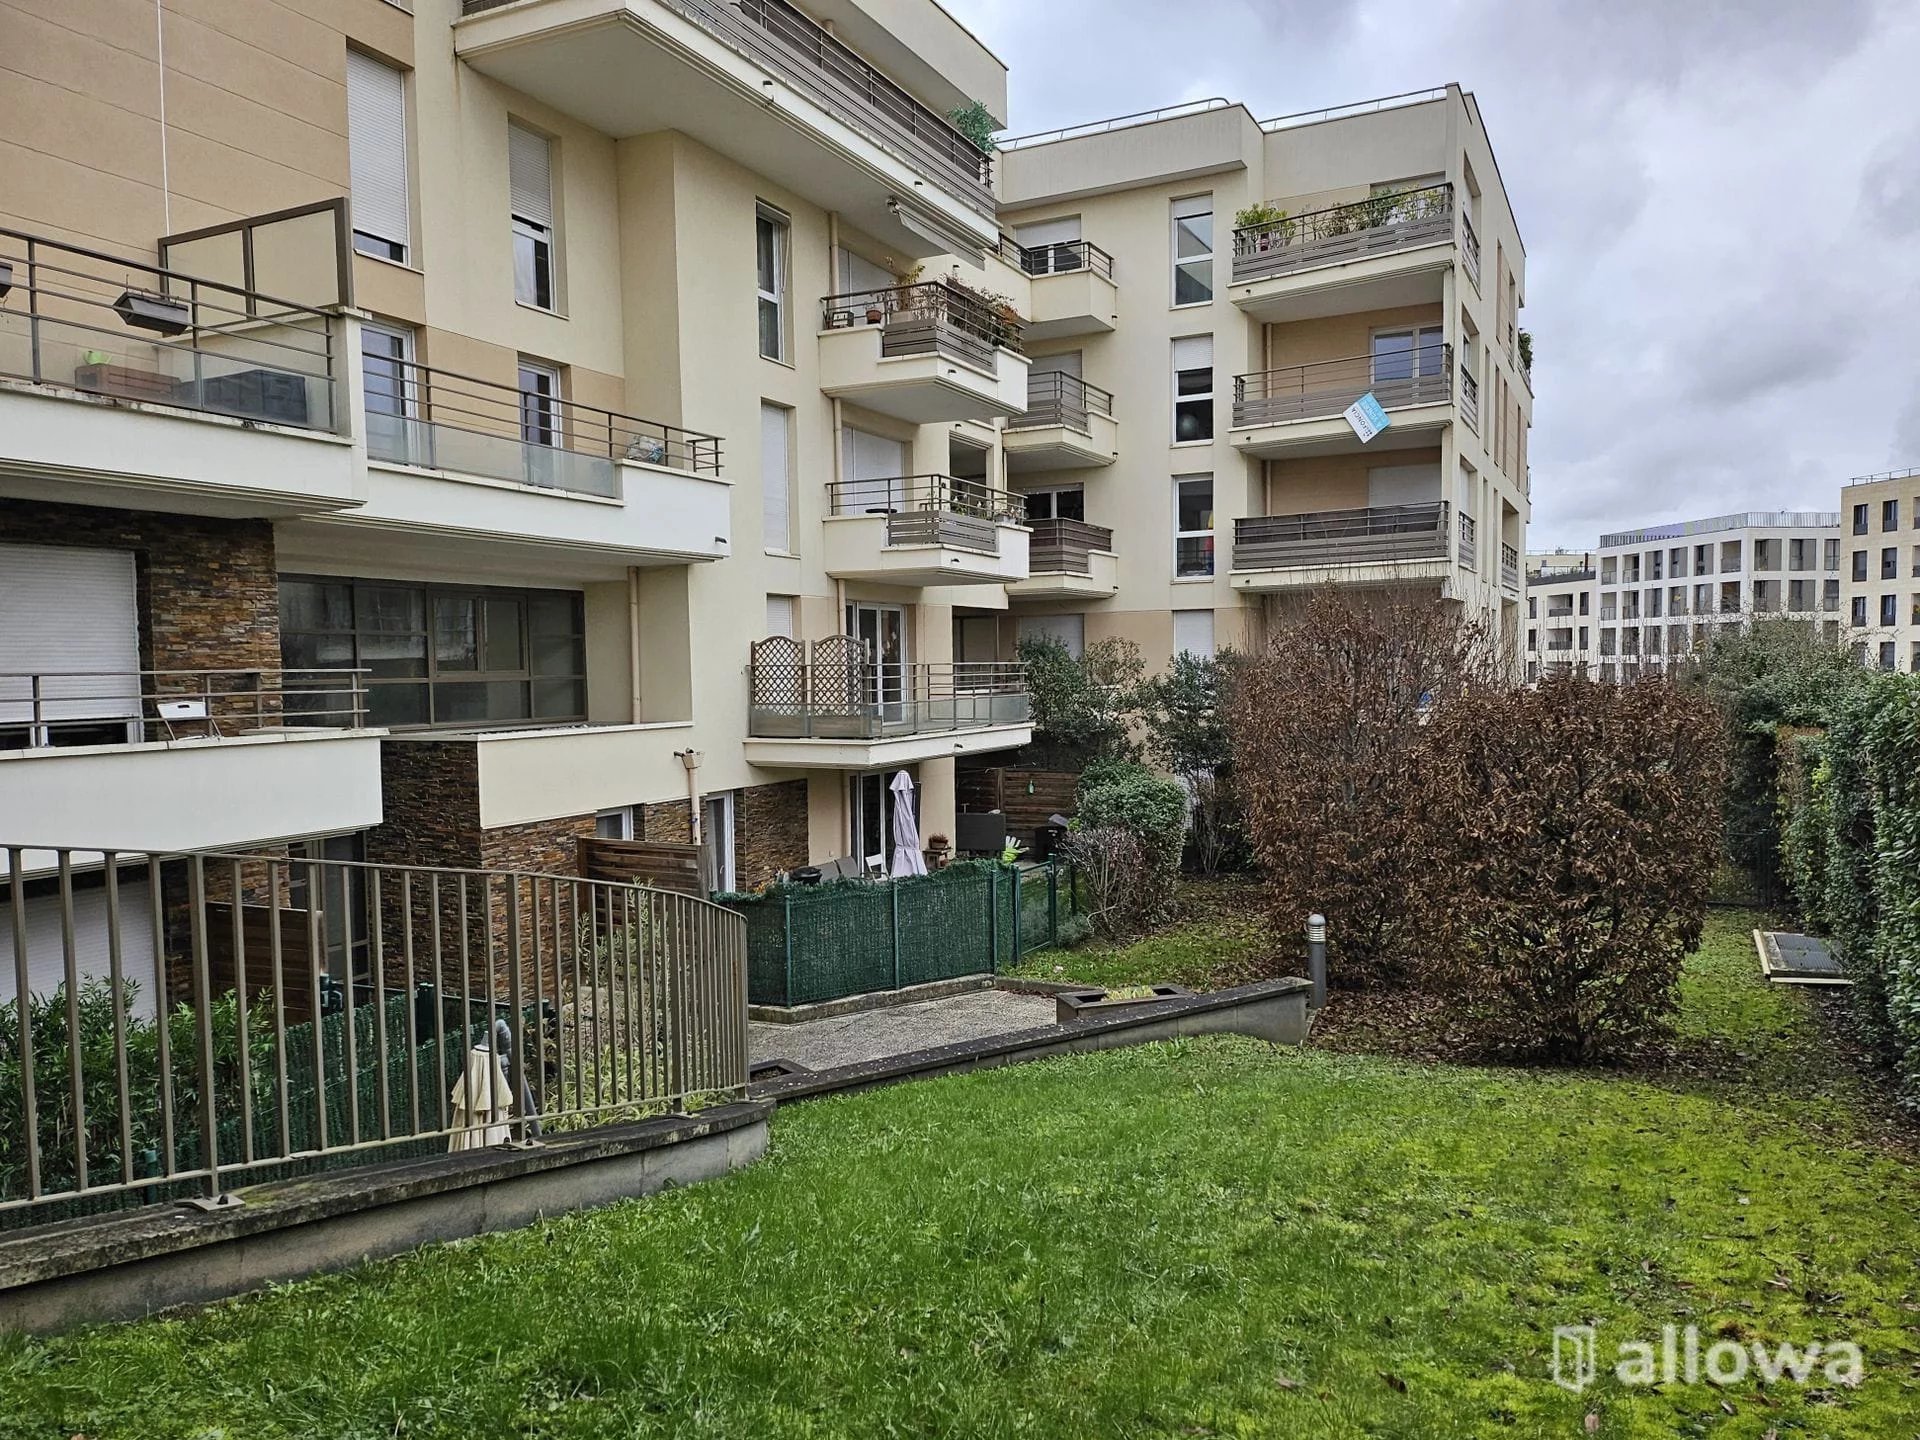 Appartement a louer chatenay-malabry - 3 pièce(s) - 62.55 m2 - Surfyn